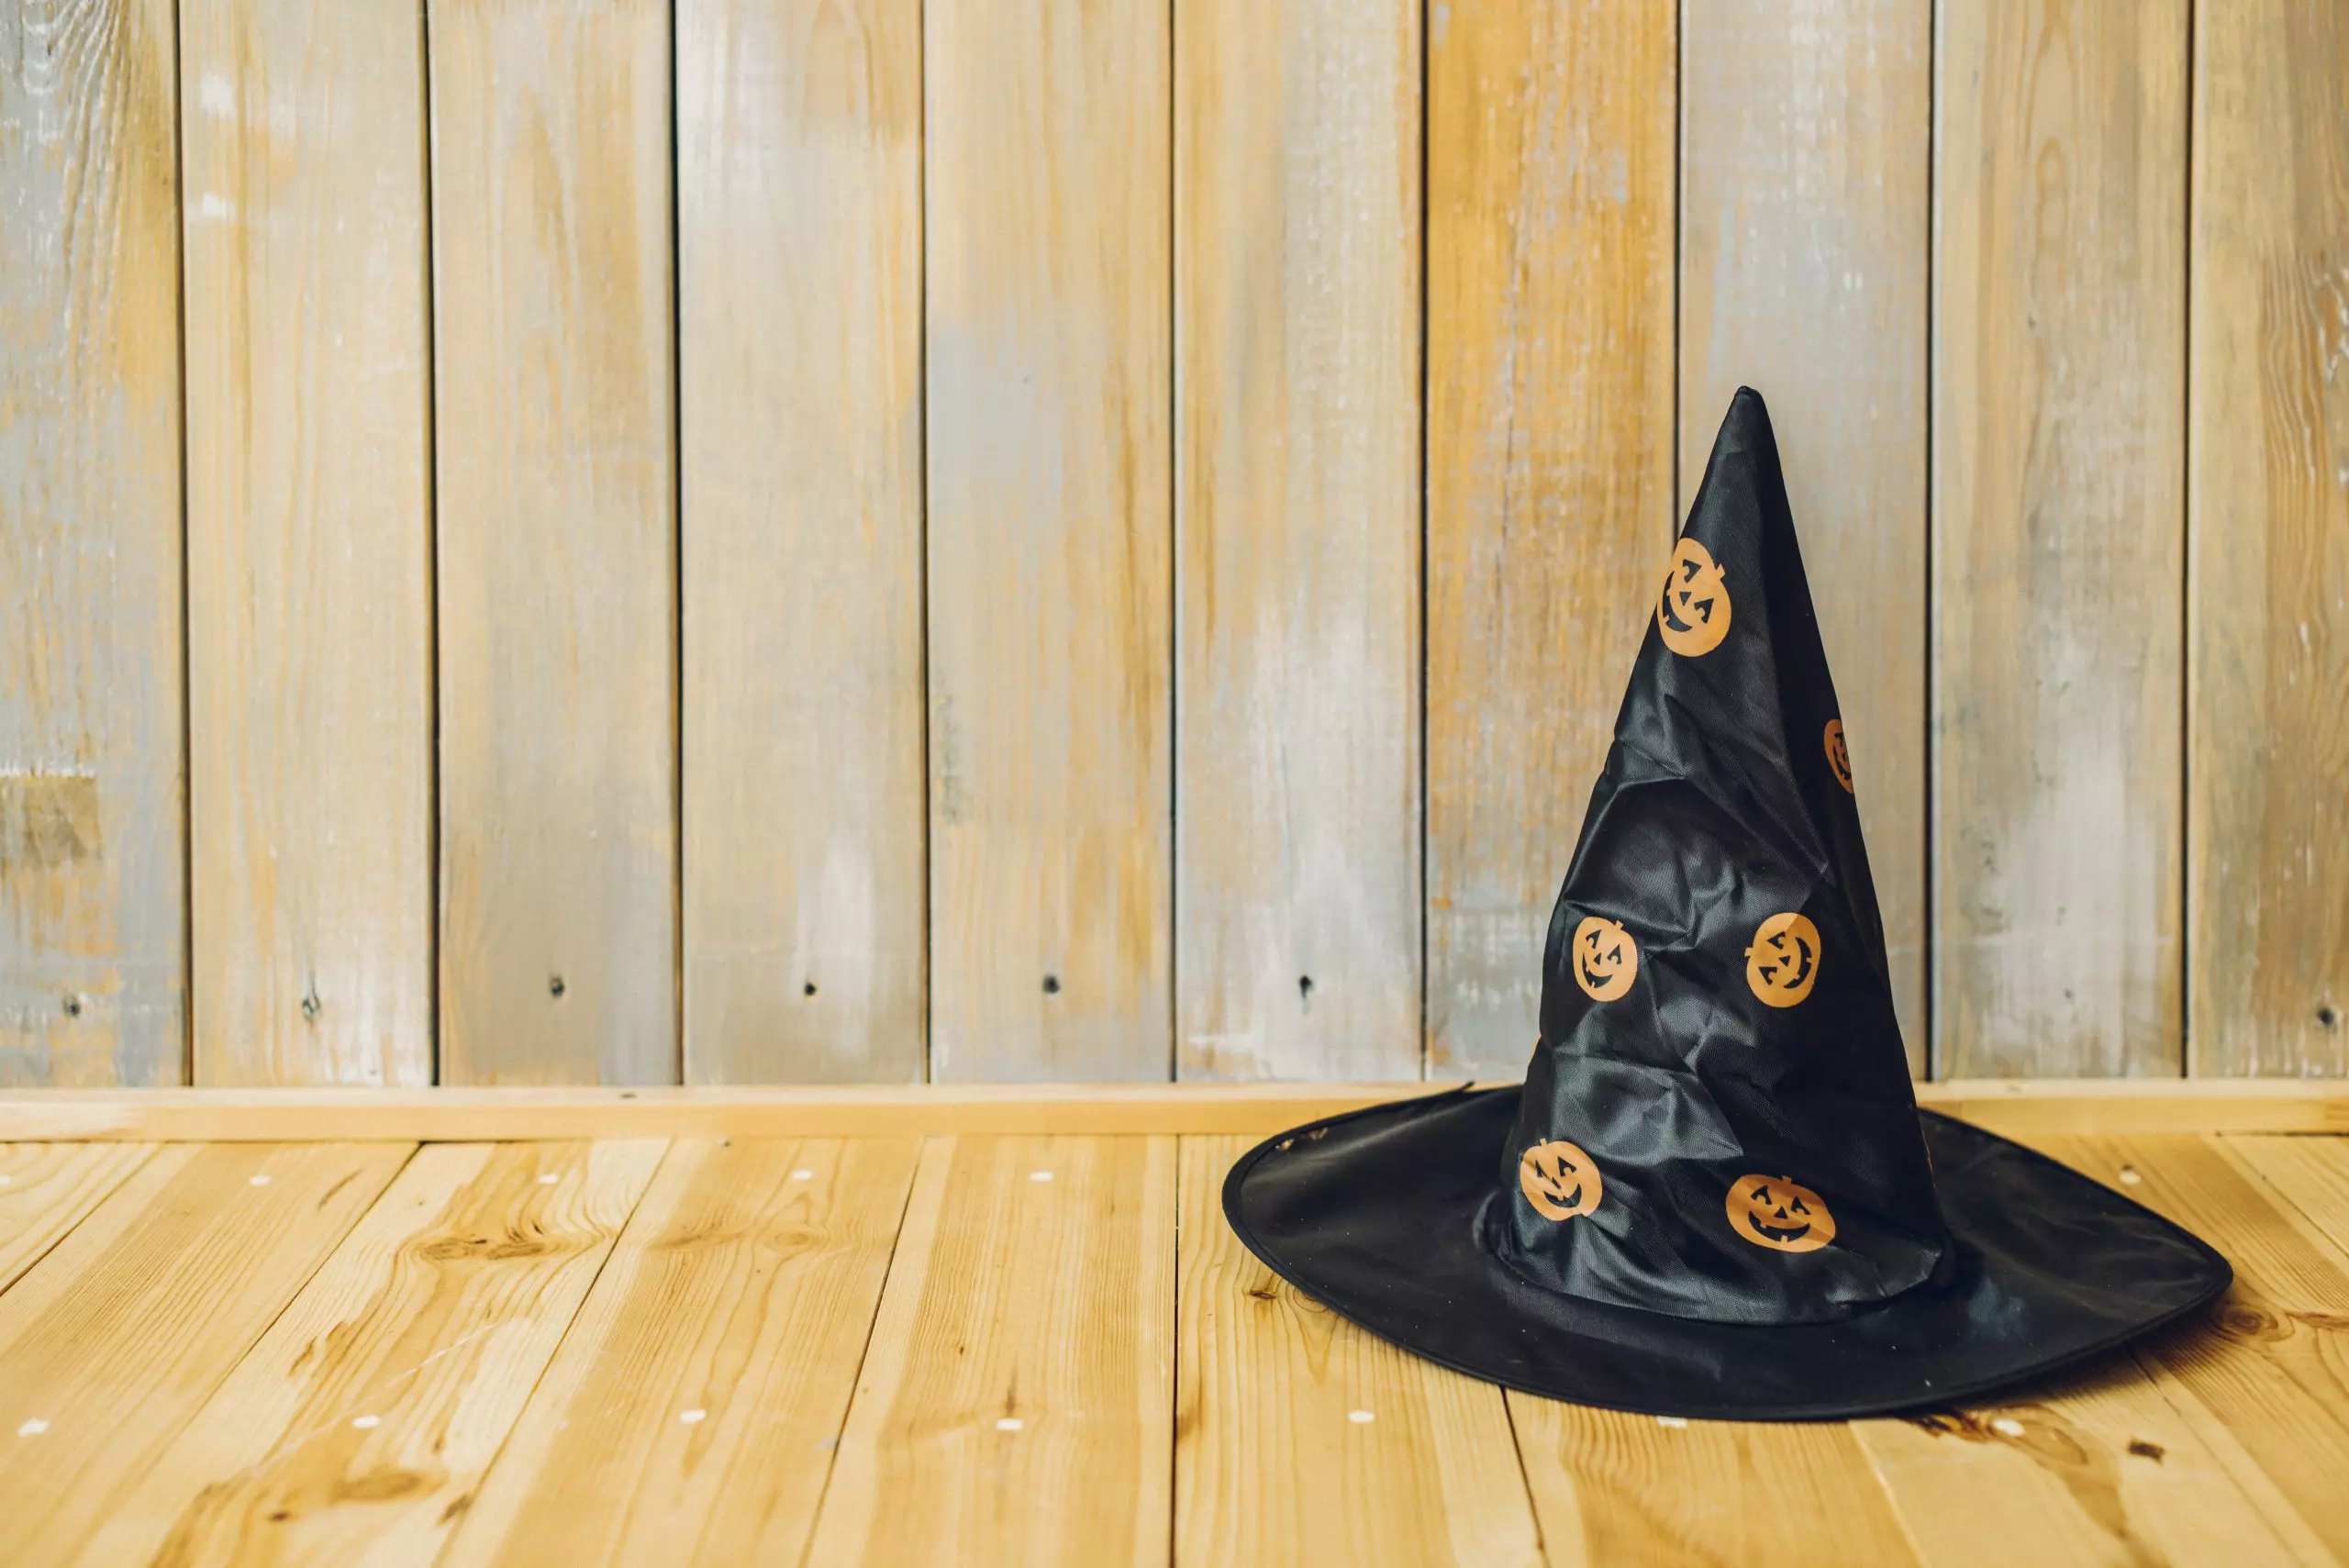 whimsical halloween decorations